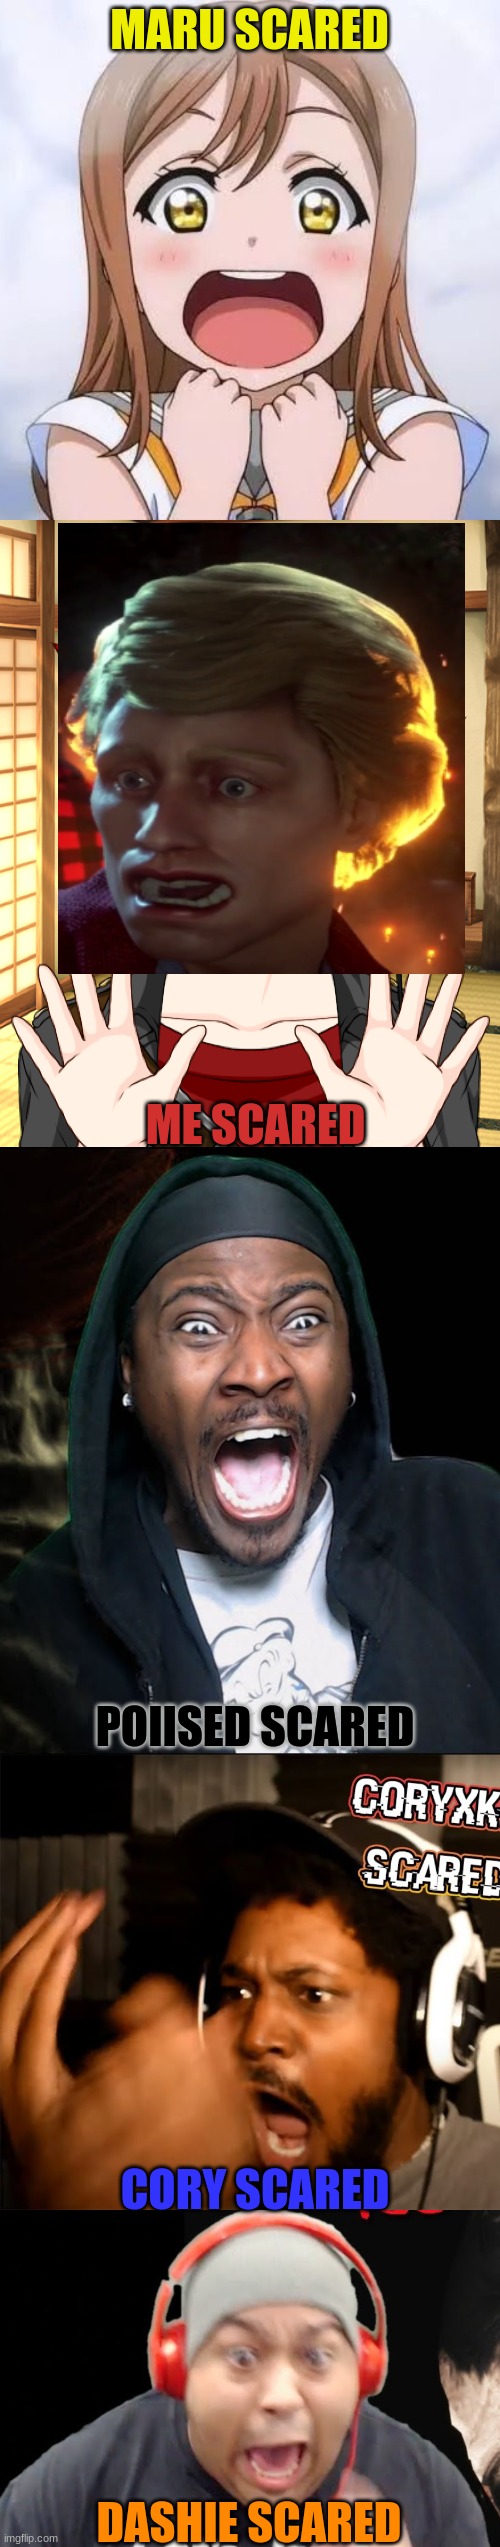 Scared face - Imgflip